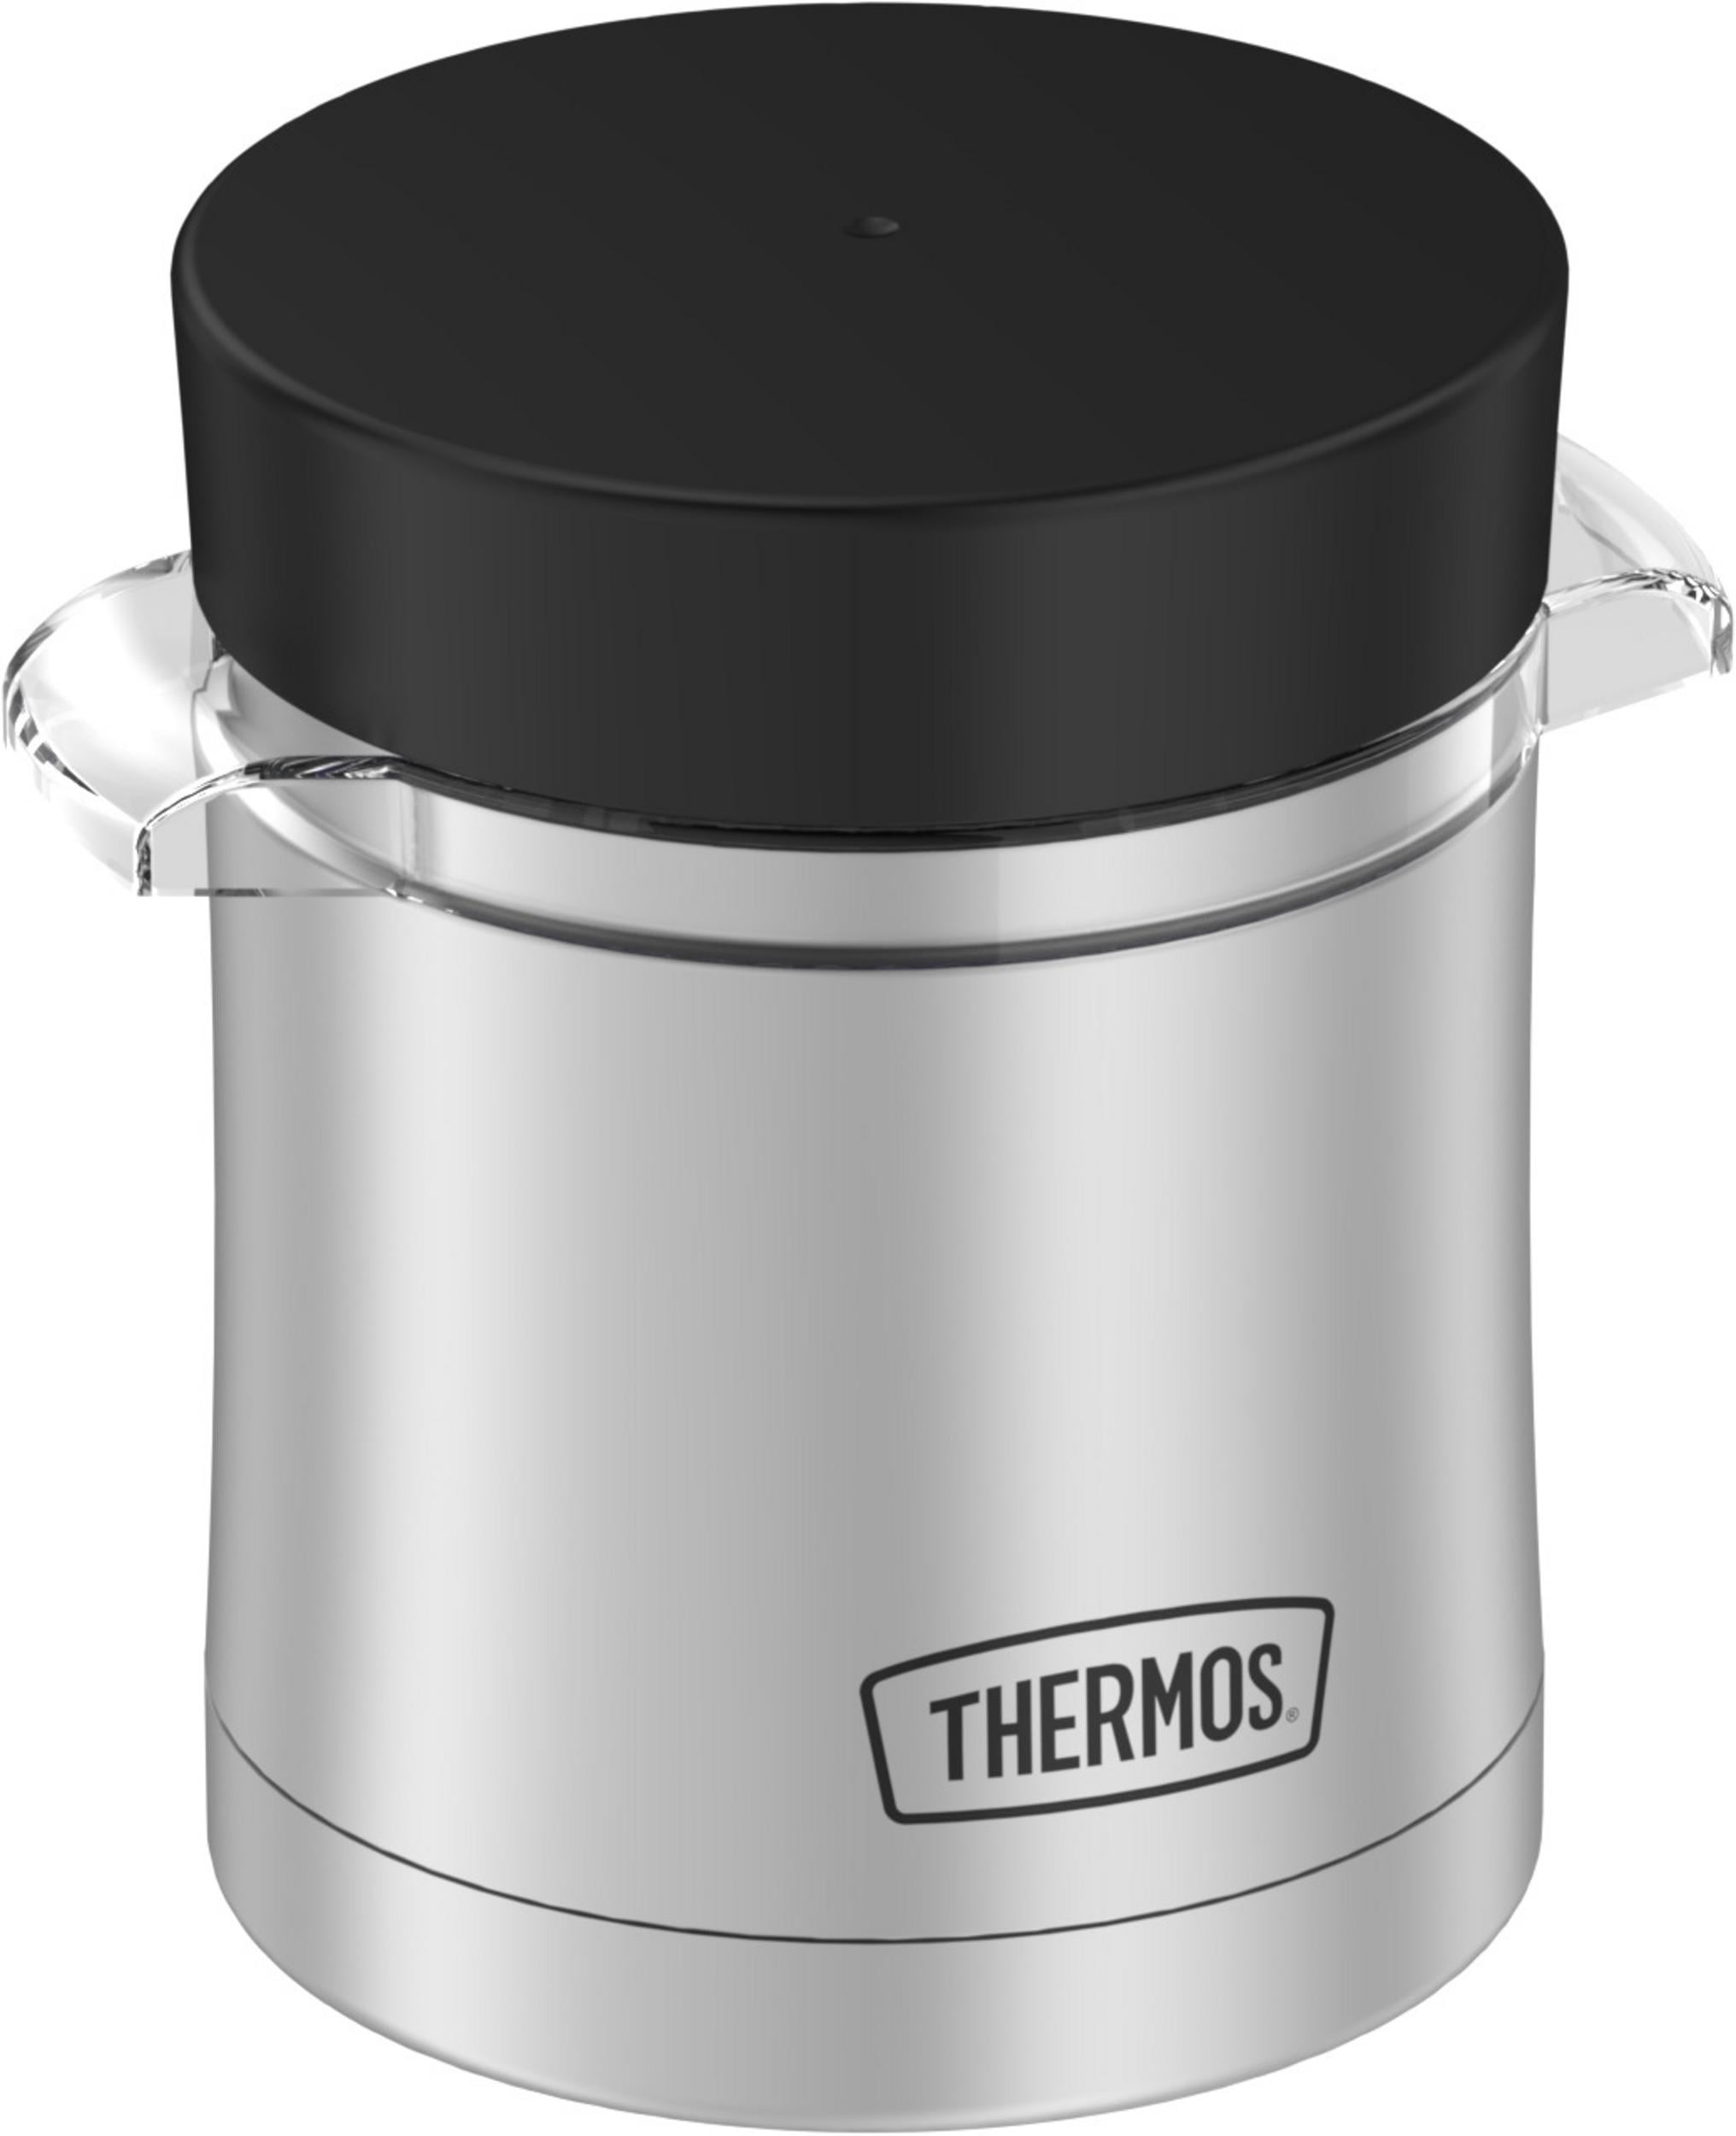 Thermos 12-Oz. Stainless Steel Microwavable Food Jar with